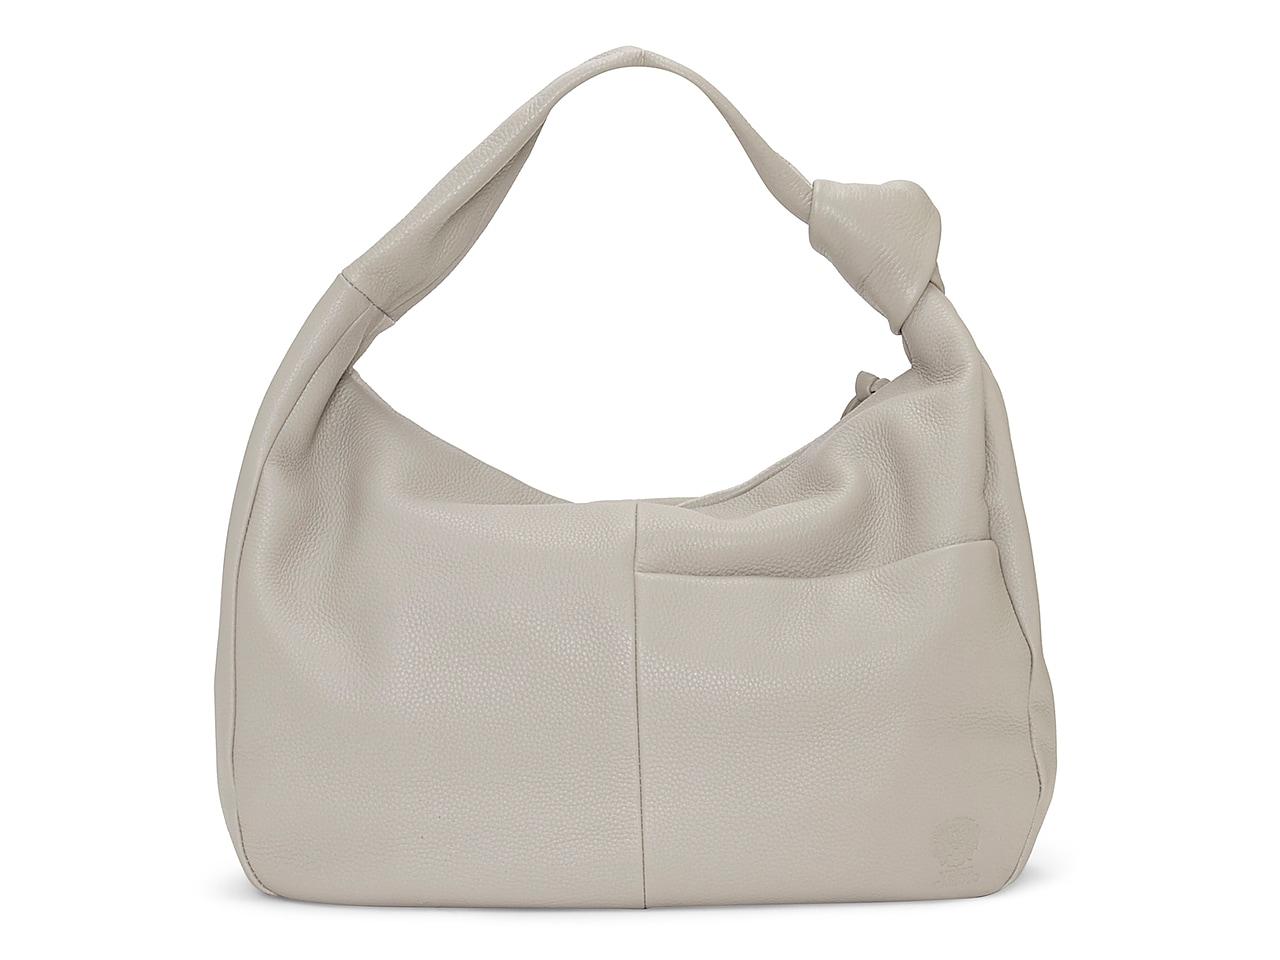 Vince Camuto Shany Leather Hobo Bag in Light Grey (Gray) - Lyst